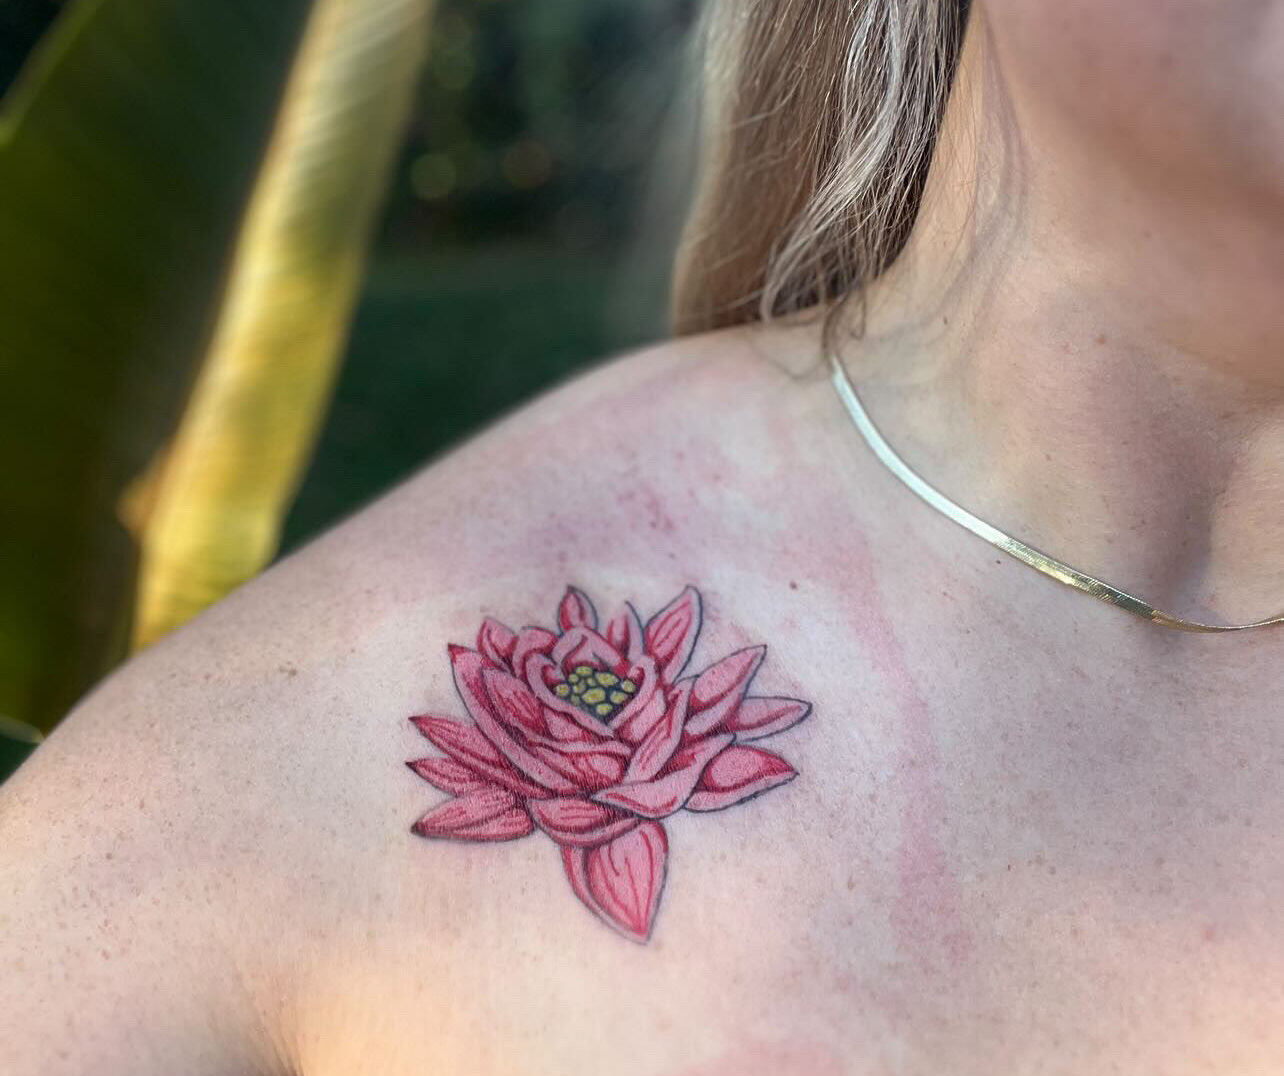 Lotus Flower Tattoo By Binky Warbucks At Iron Palm Tattoos. The lotus flower is a symbol of loyalty and sincerity. Many clients get it as a representation of their character or some internal sentiment they hold.